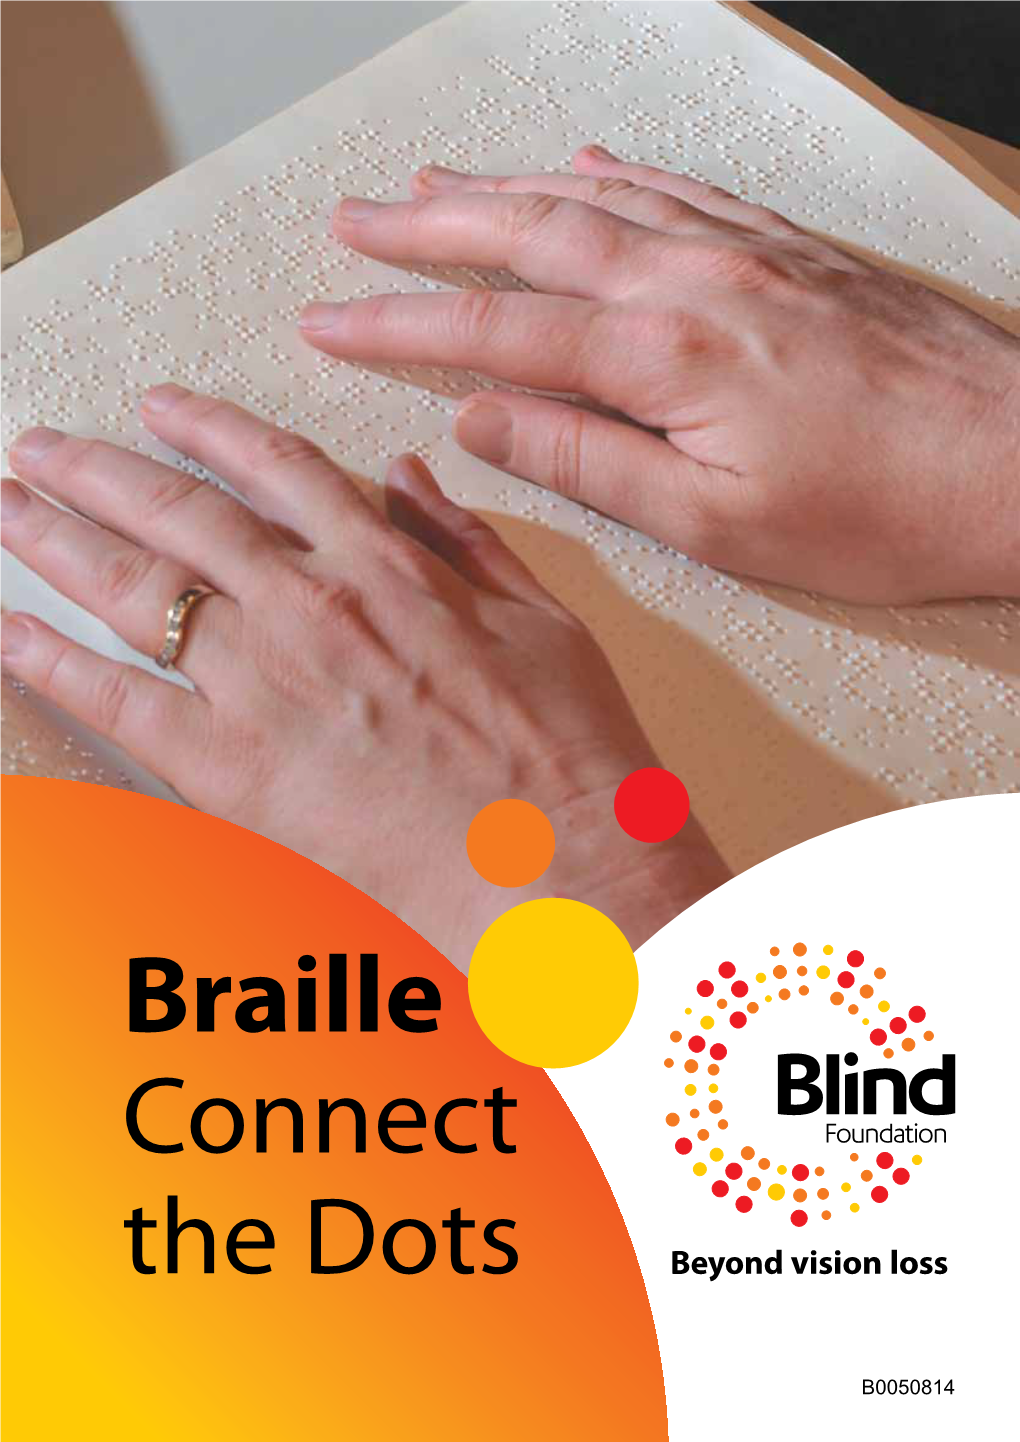 Braille Connect the Dots